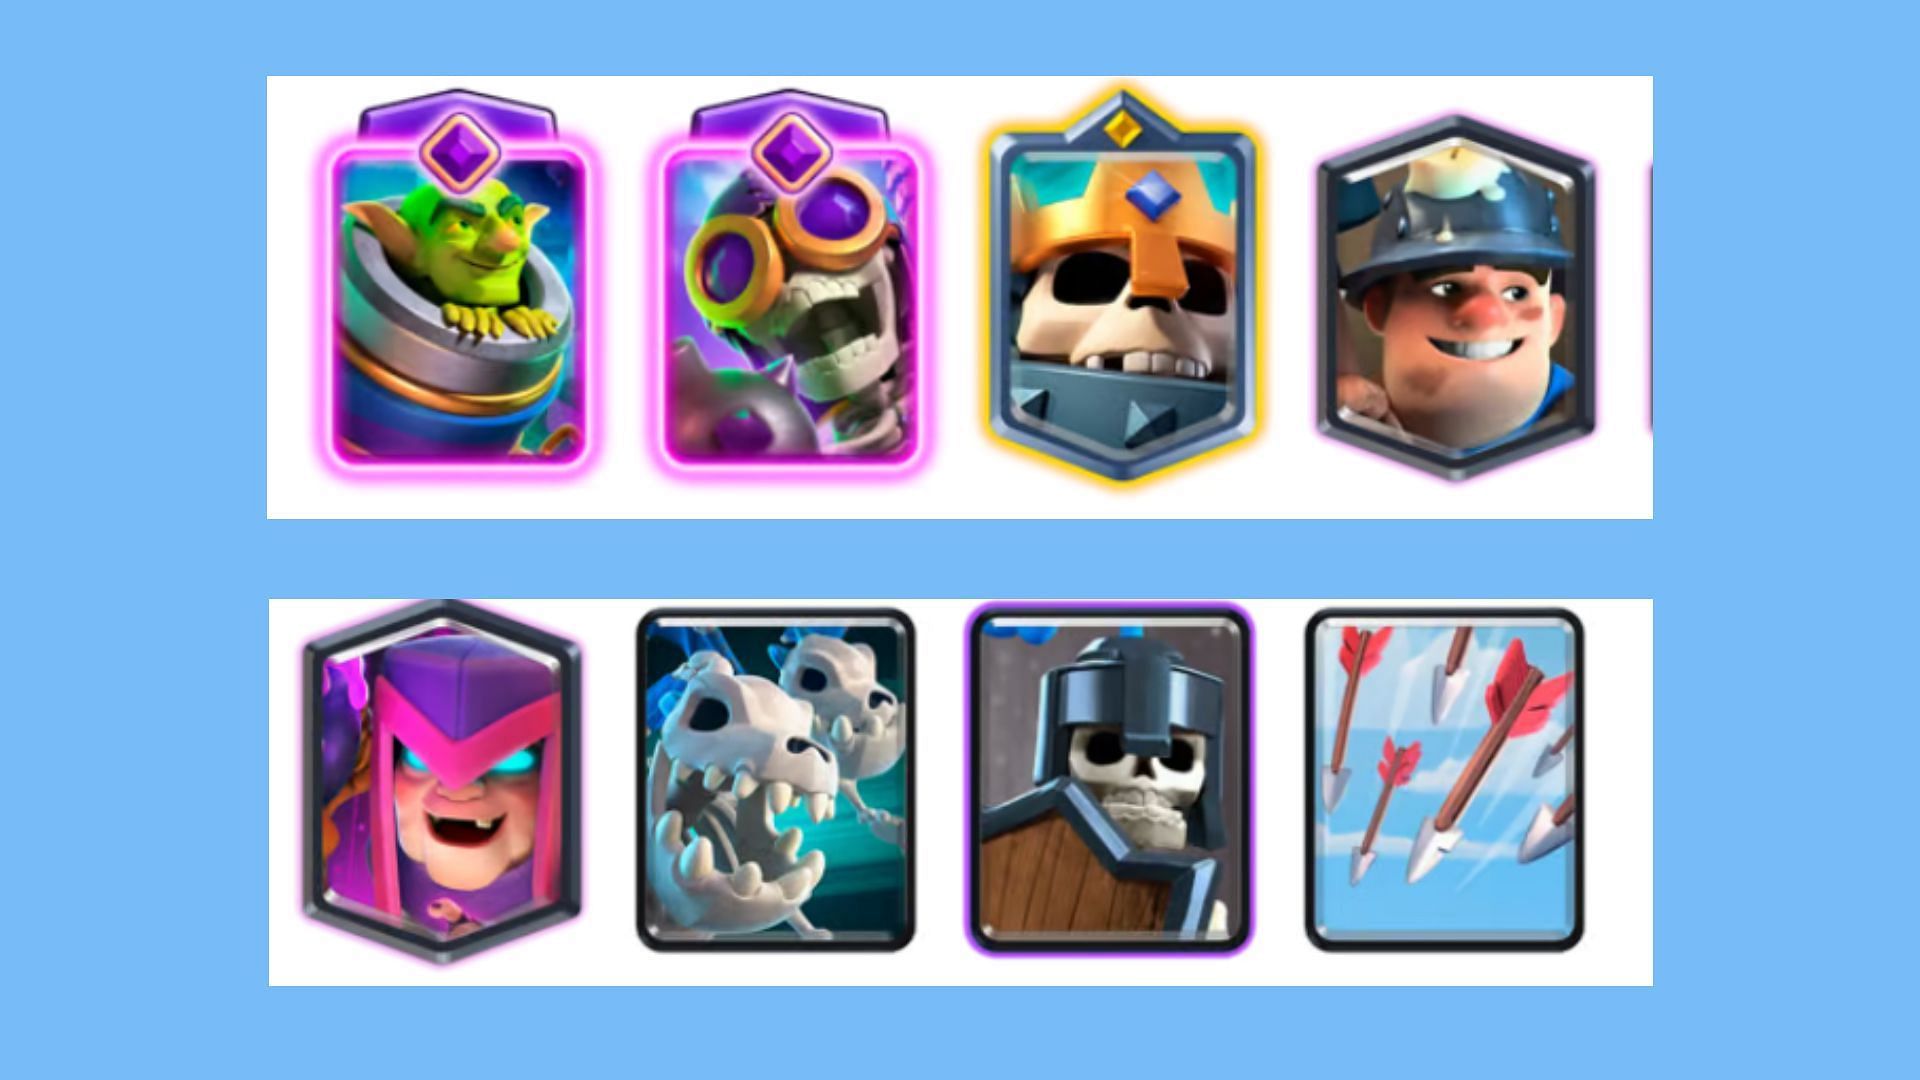 Required composition of the second deck (Image via Supercell)